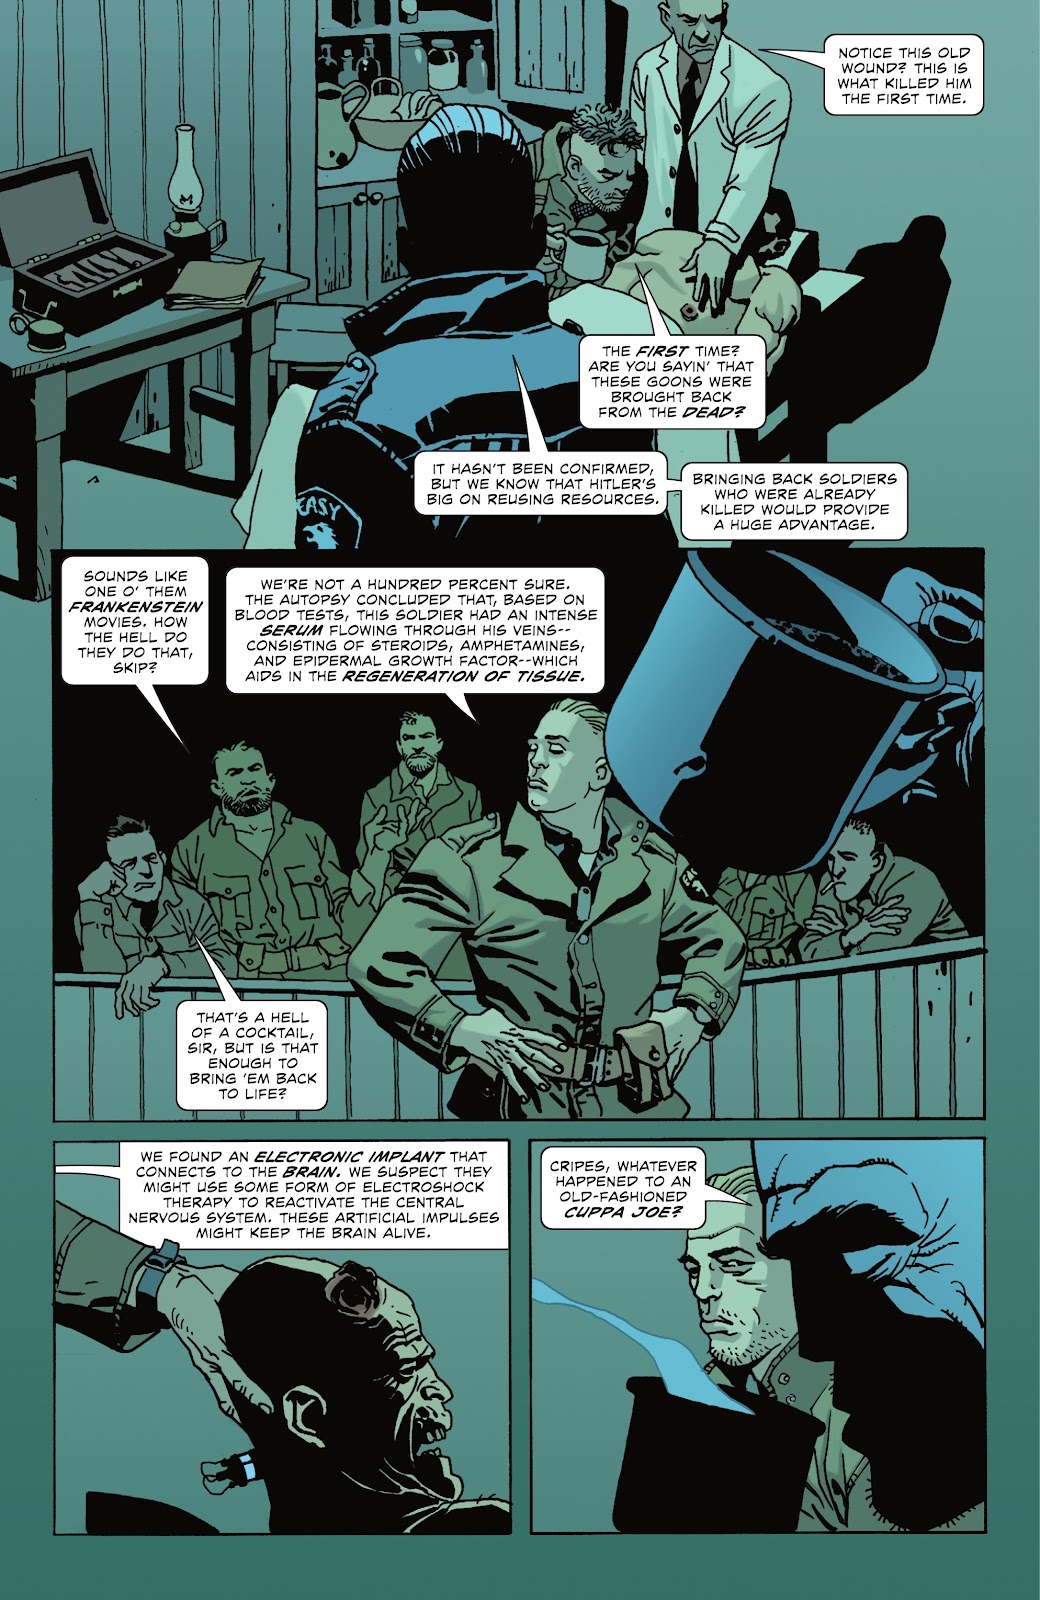 DC Horror Presents: Sgt. Rock vs. The Army of the Dead issue 1 - Page 10